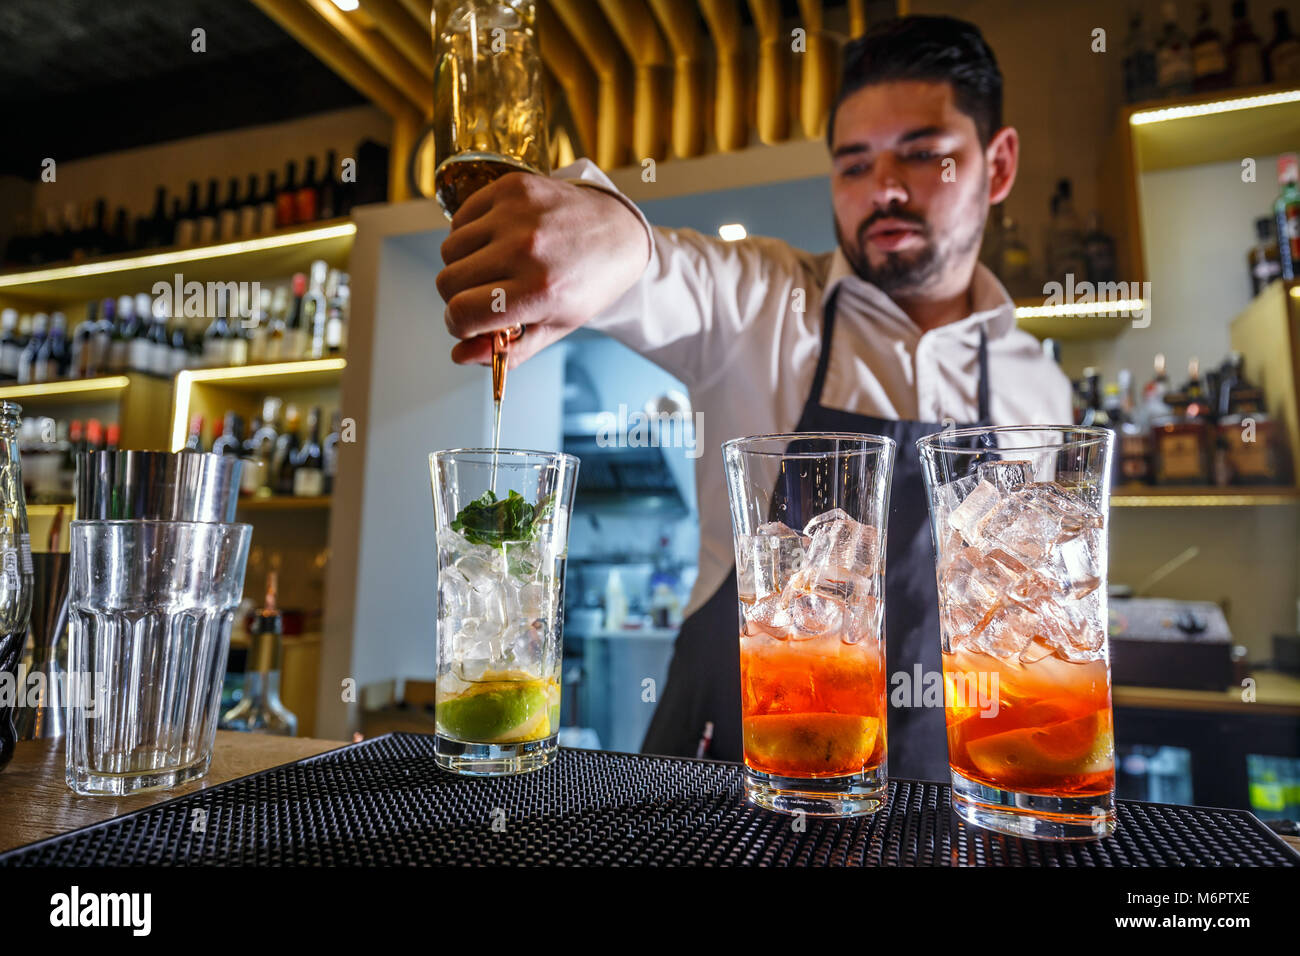 Barman at work, he is preparing cocktails, concept about service and  beverages Stock Photo - Alamy